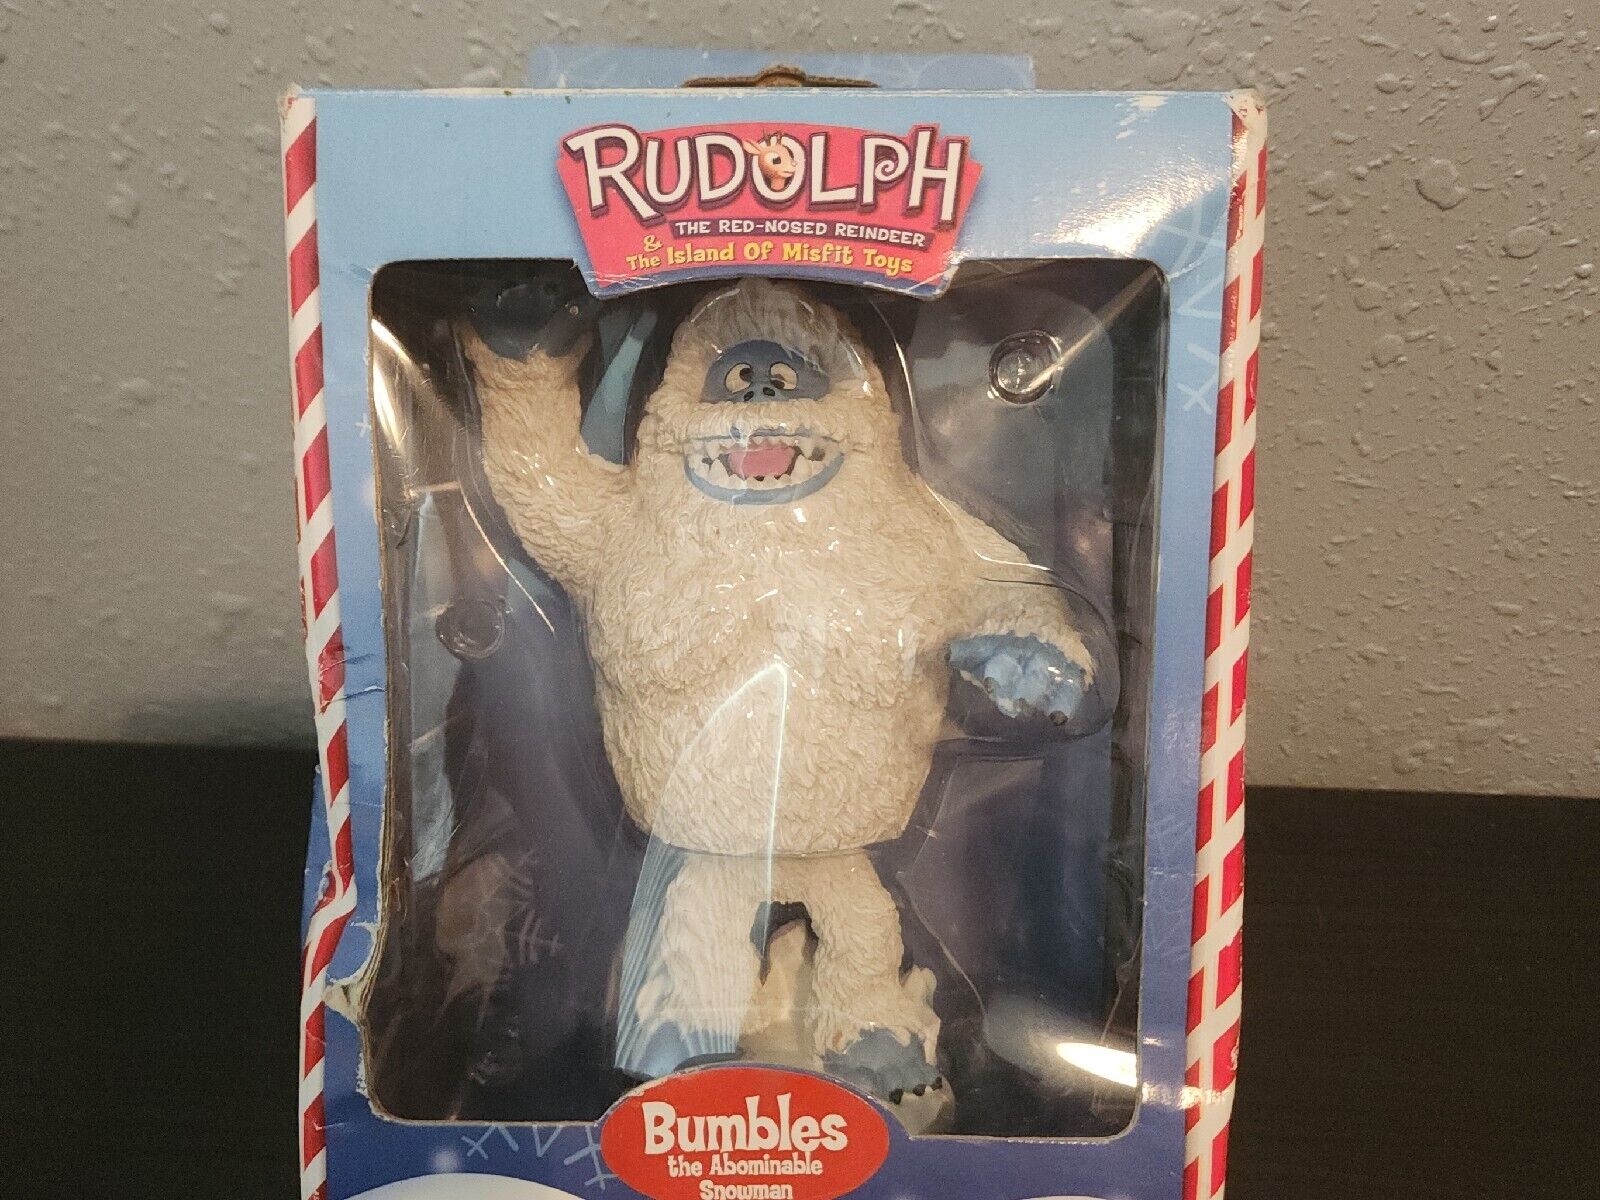 Bumbles the Abominable Snowman Rudolph Island of Misfit Toys Bobblehead 2001